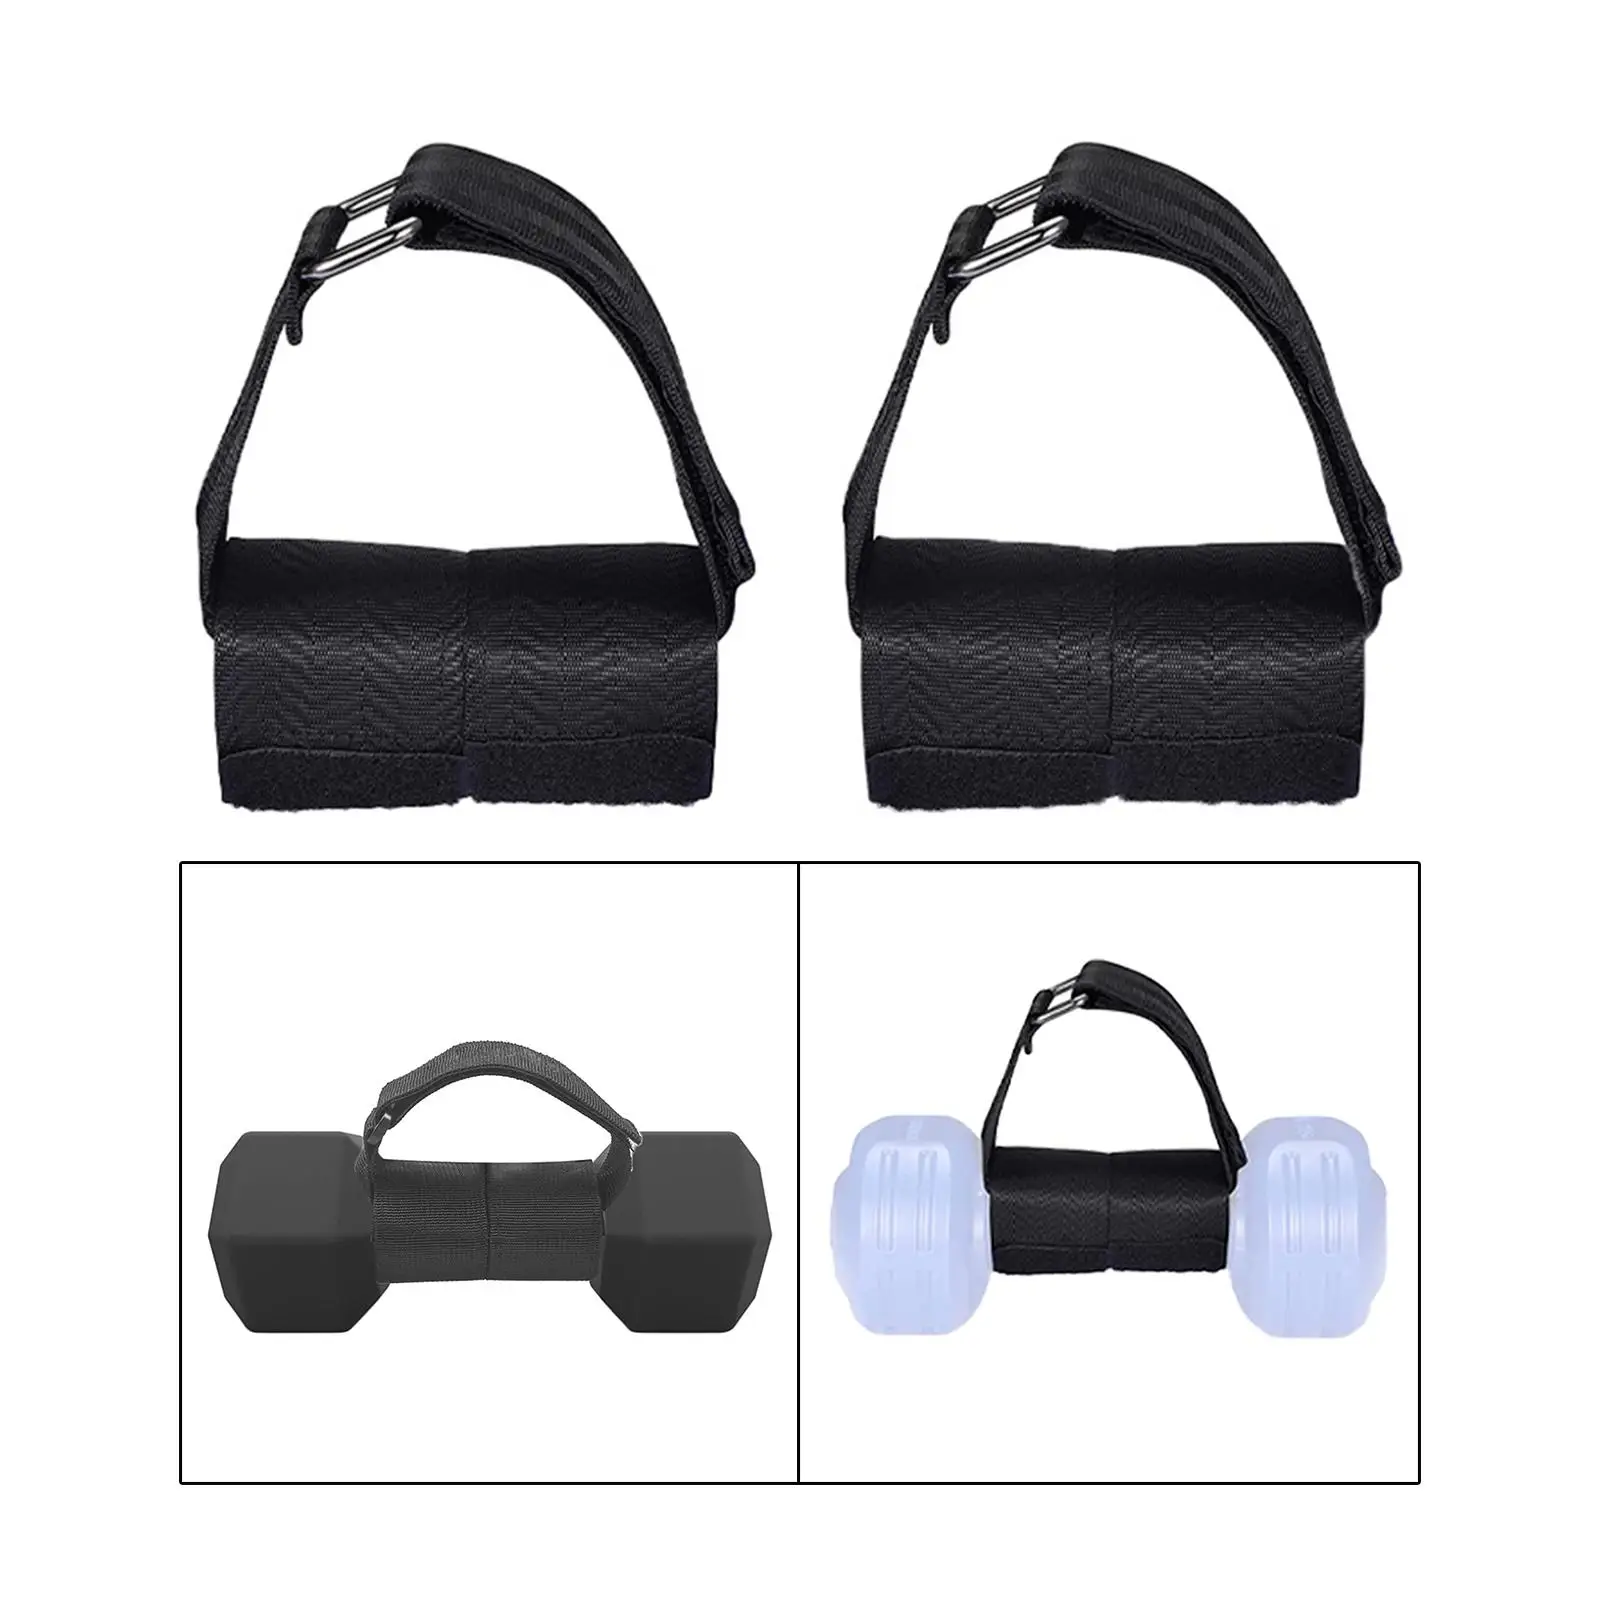 2 Pieces Adjustable Weight Dumbbell Ankle Straps Men Women Dumbbell Shoes Attachment for Home Strength Training Workout